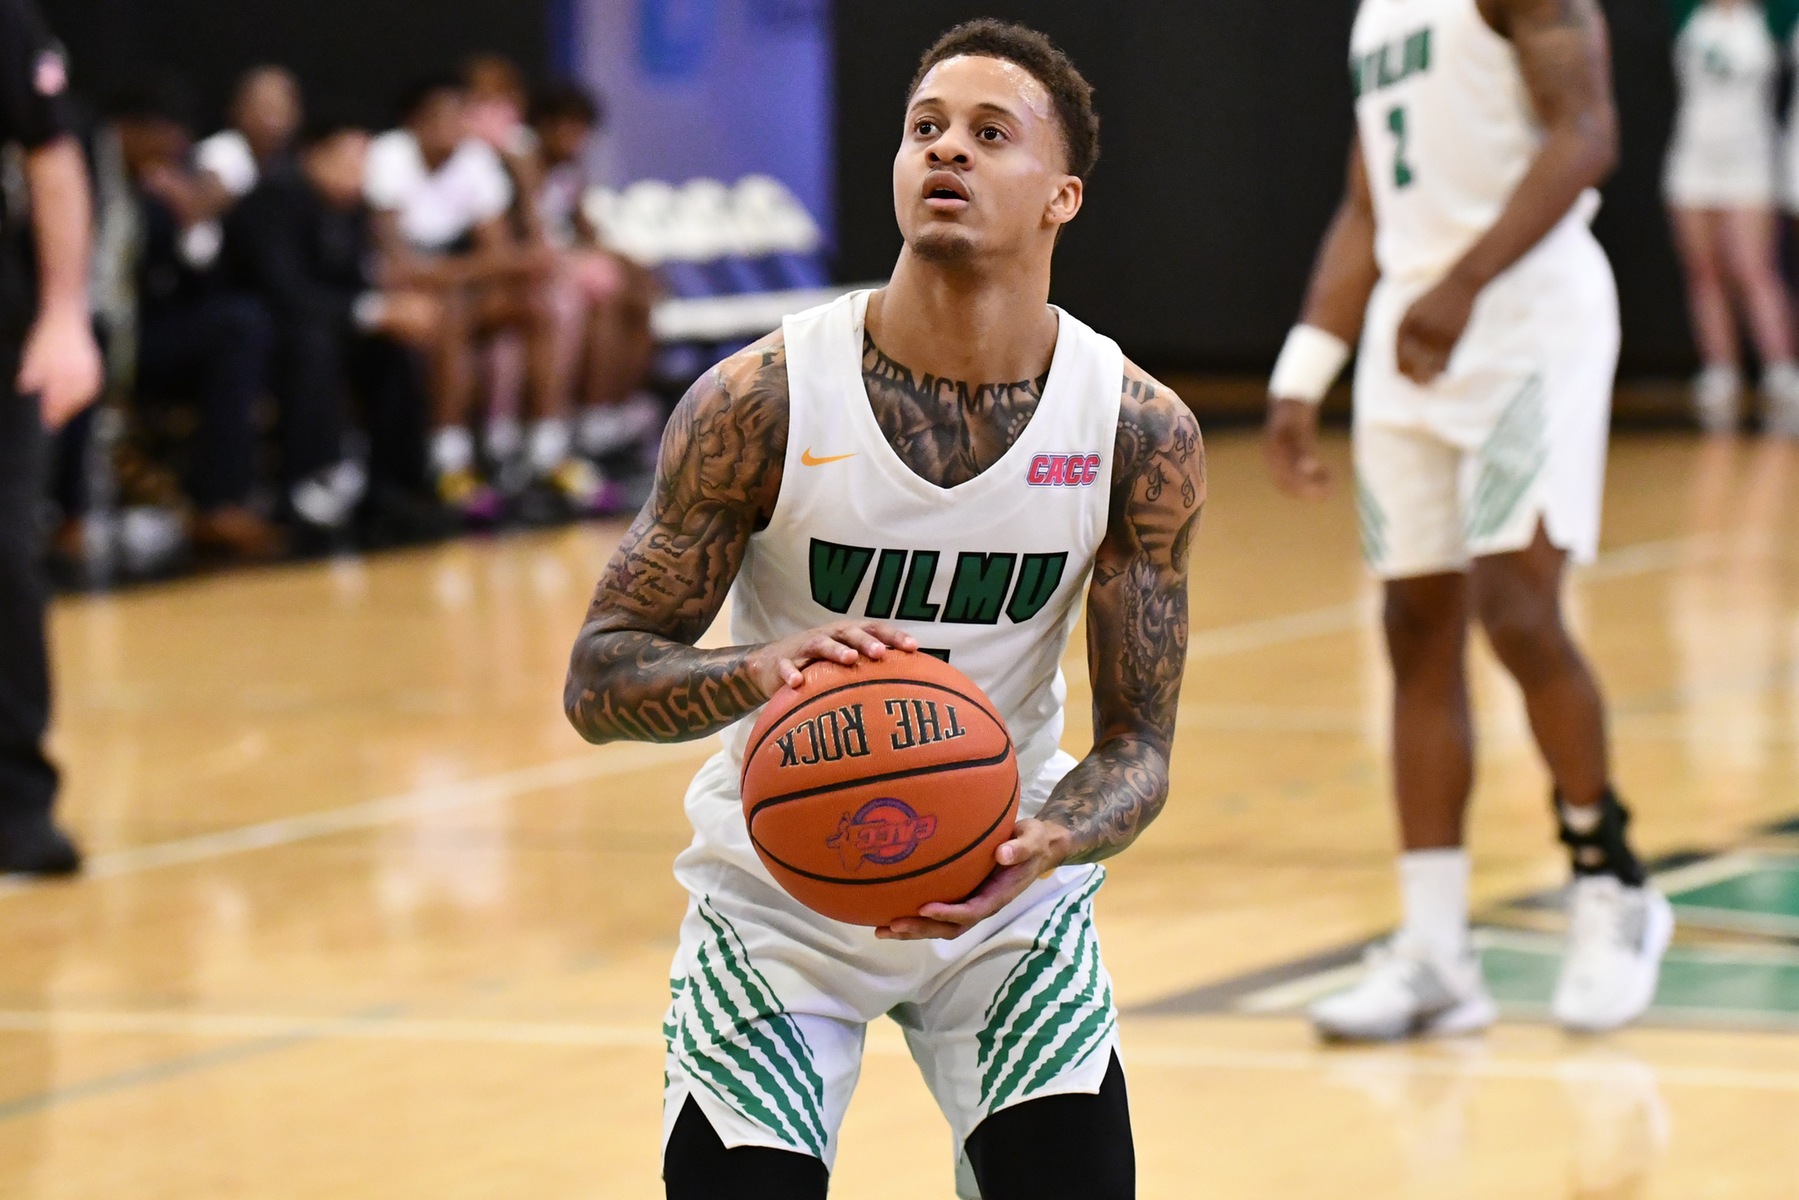 File photo of Jermaine head at the foul line, where he went 13-for-13 against Bloomfield, setting a new single game mark for makes without a miss. Copyright 2019; Wilmington University. All rights reserved. Photo by Gavin Bethell. December 14, 2019 vs. Kutztown.